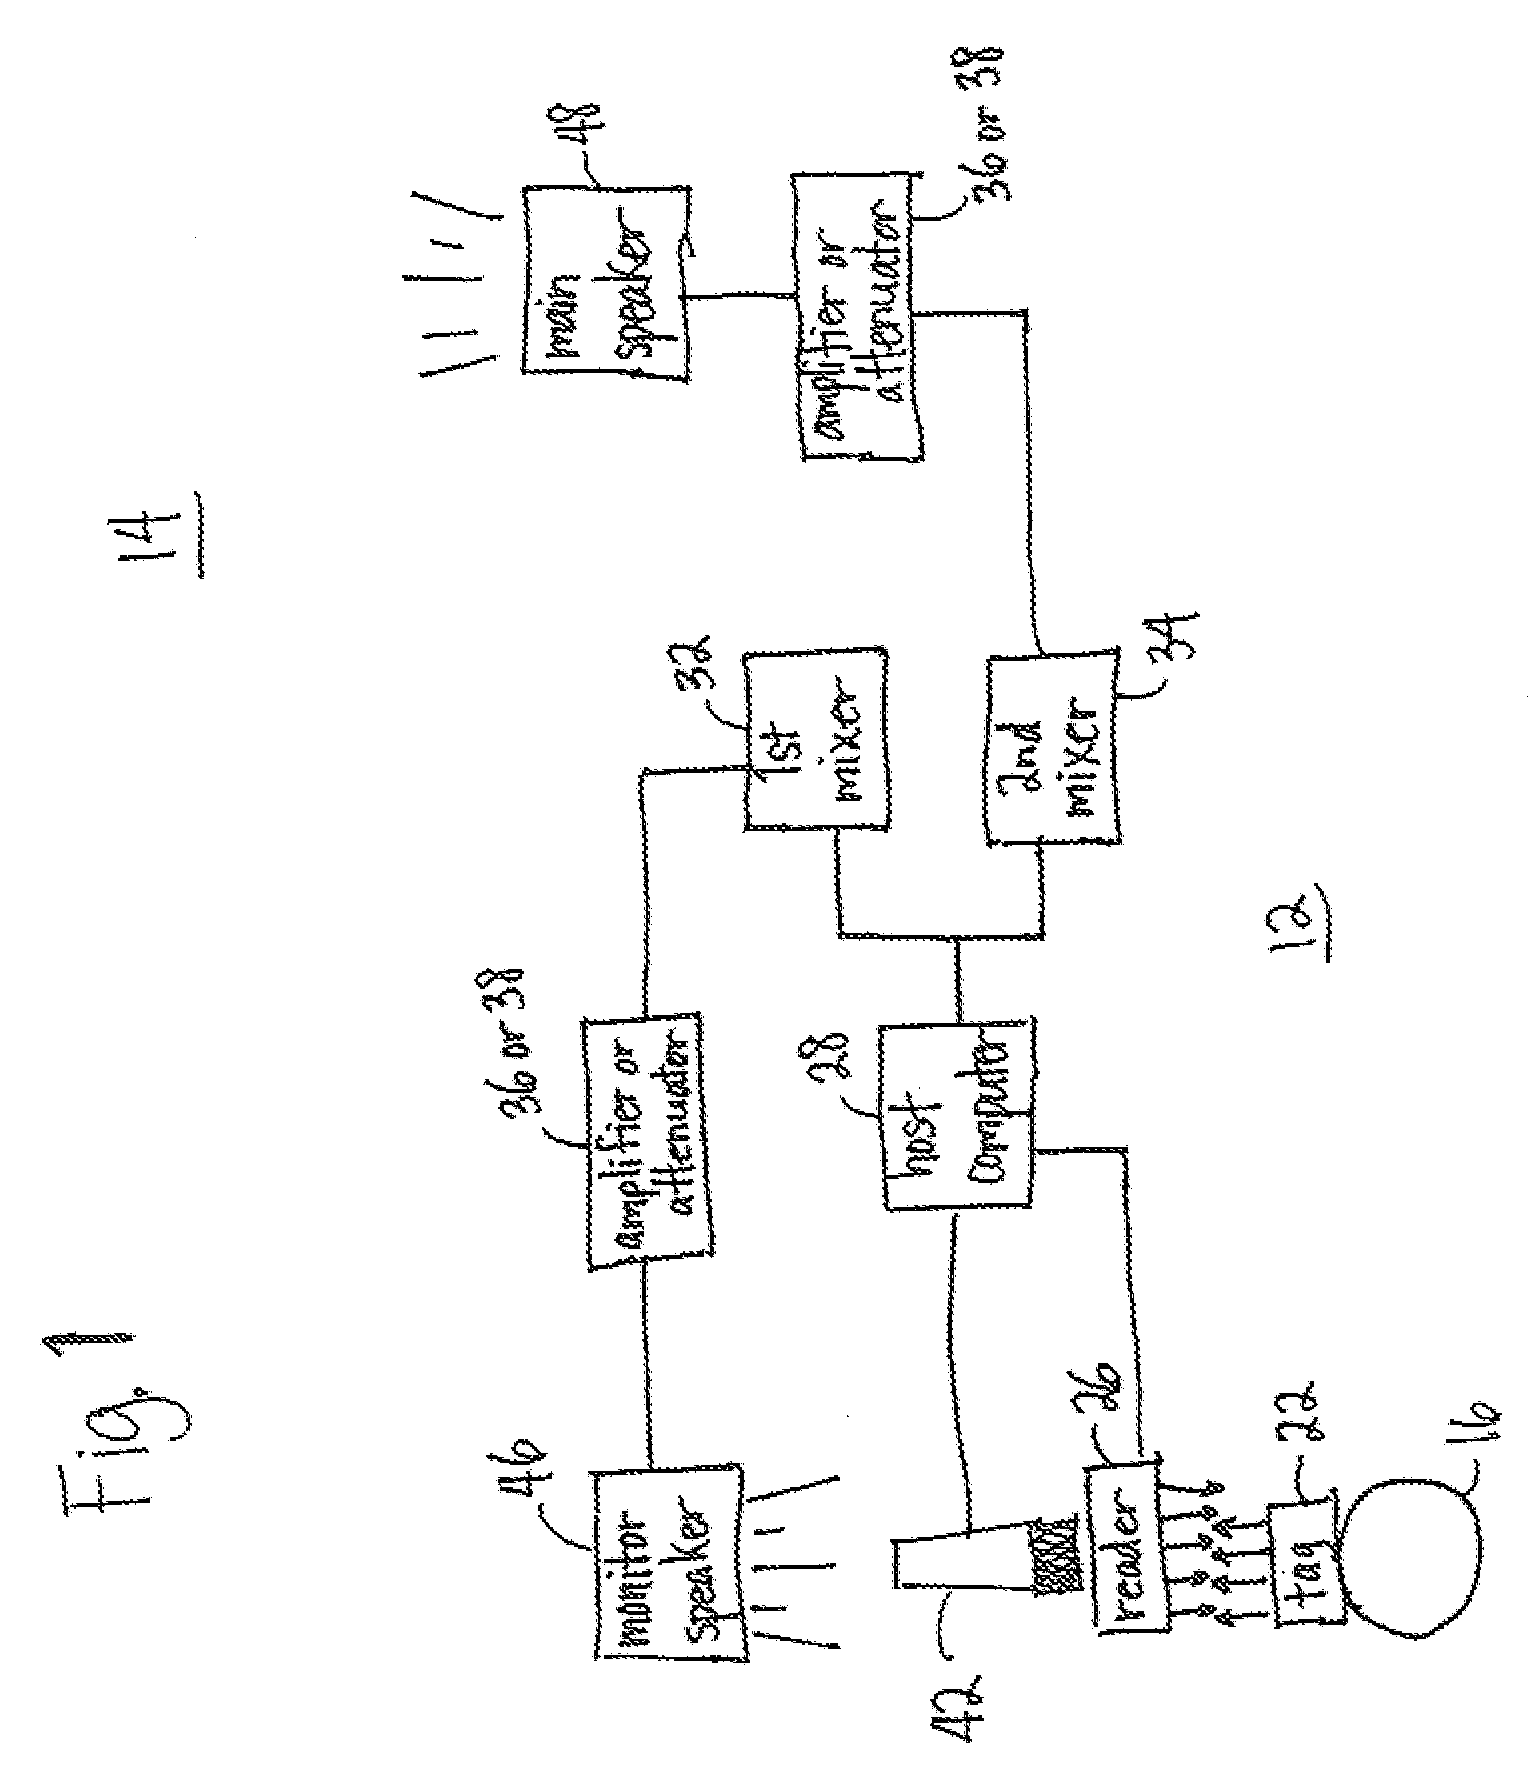 Method for controlling entertainment equipment based on performer position